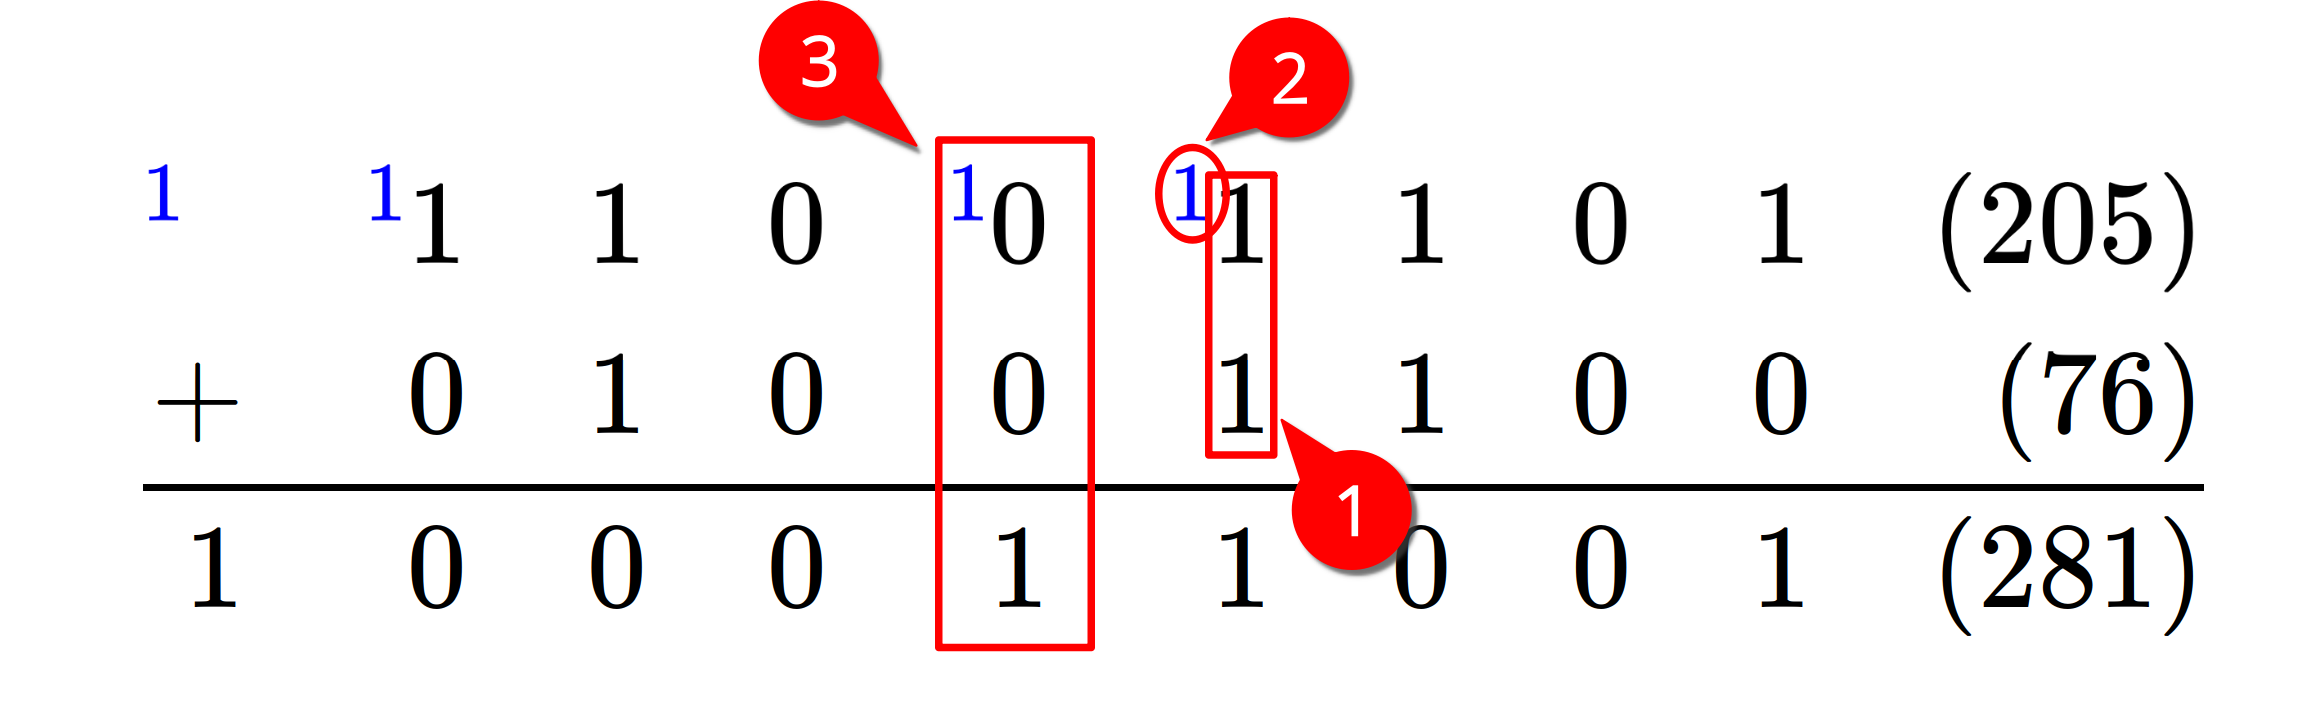 Binary addition example. First callout circles the initial two input bits in a column. Second callout circles the carry bit incoming from the lower column. Third callout circles the entire next column.